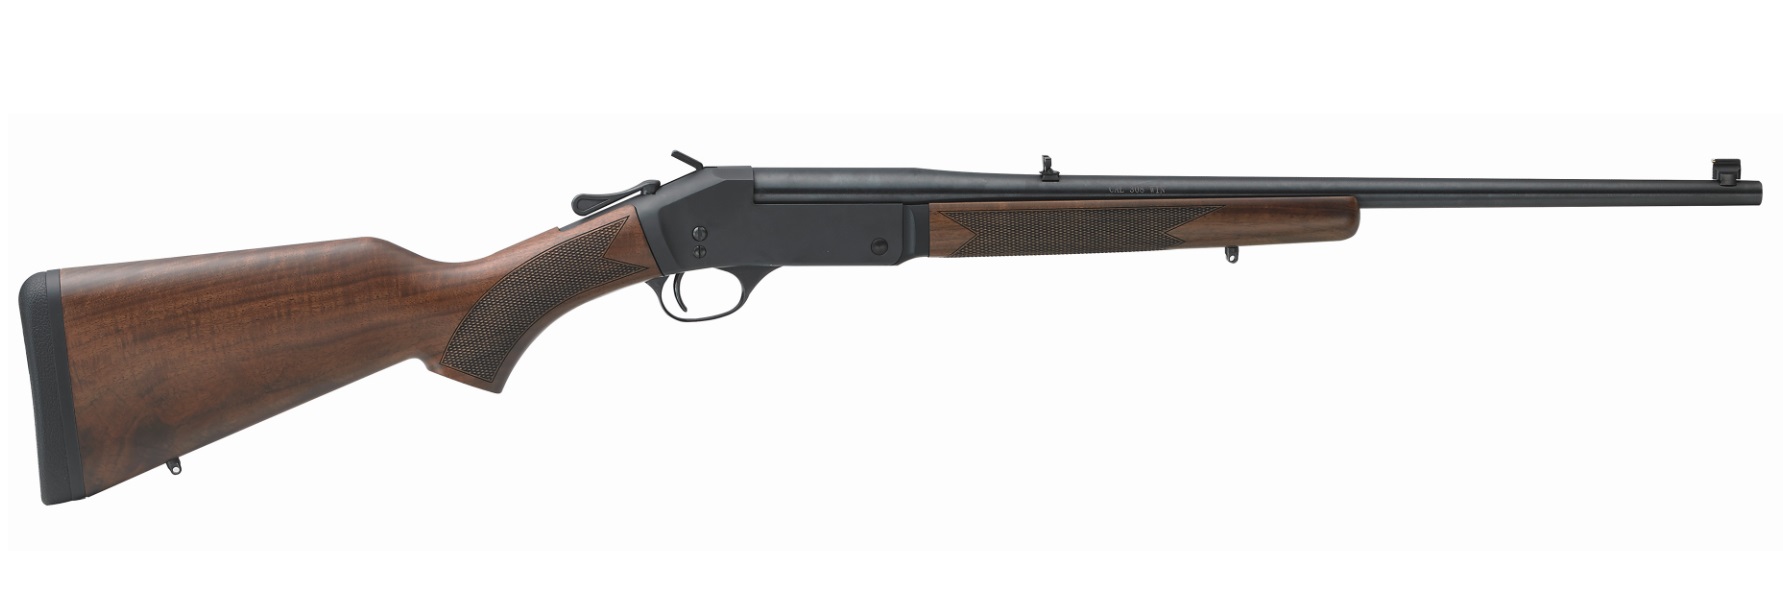 Henry Repeating Arms Henry Singleshot Rifle 44 Magnum | 44 Special